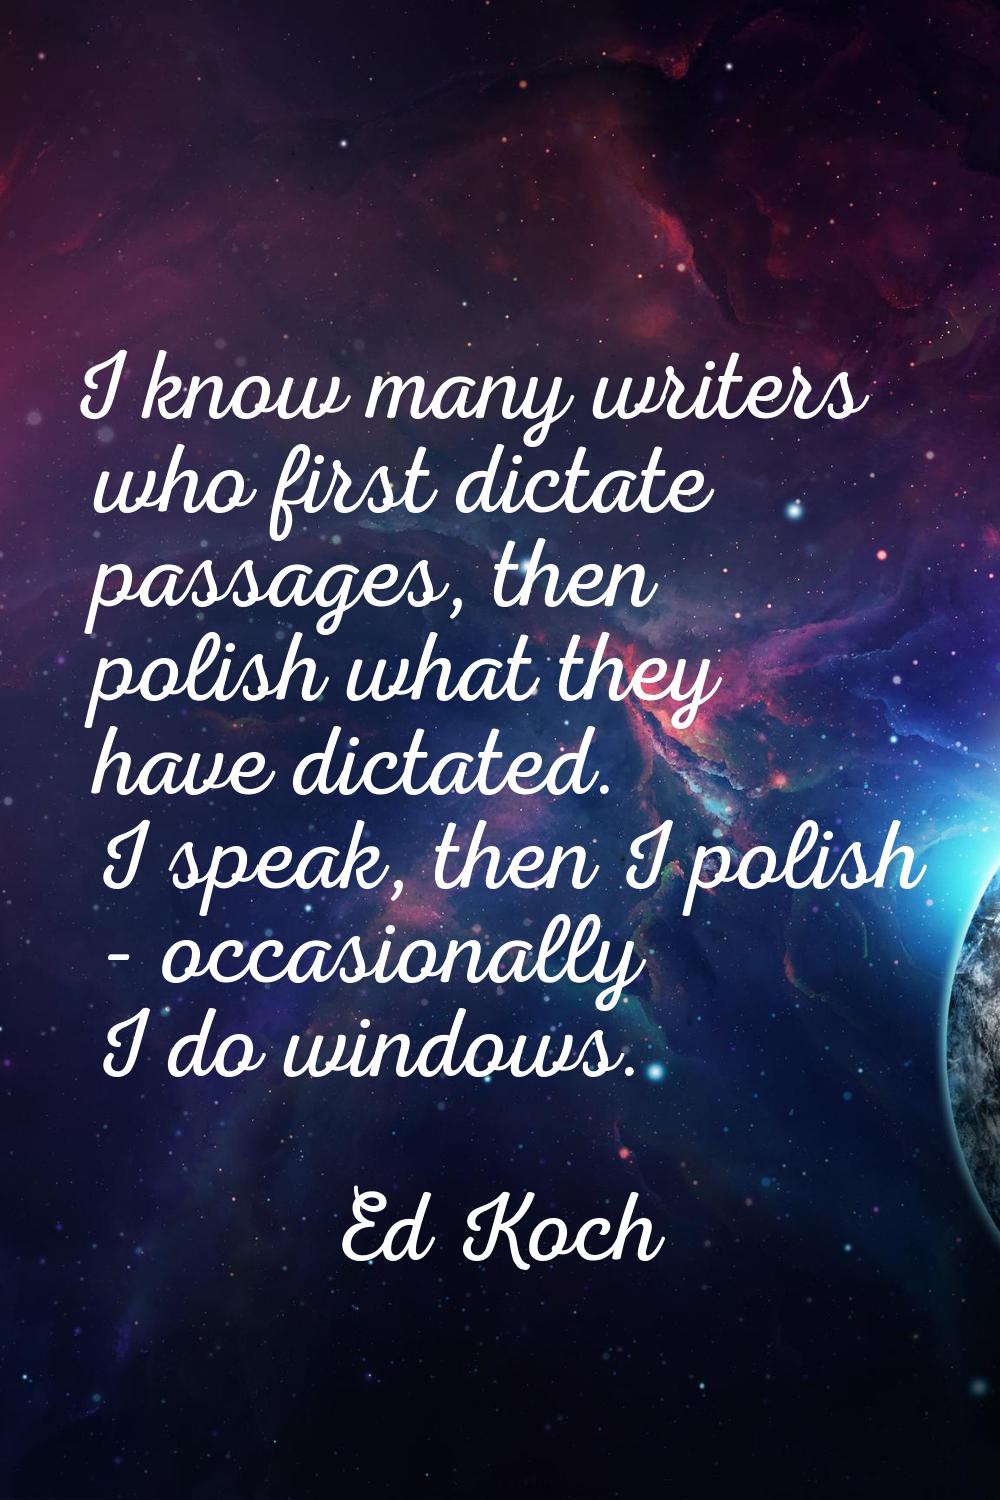 I know many writers who first dictate passages, then polish what they have dictated. I speak, then 